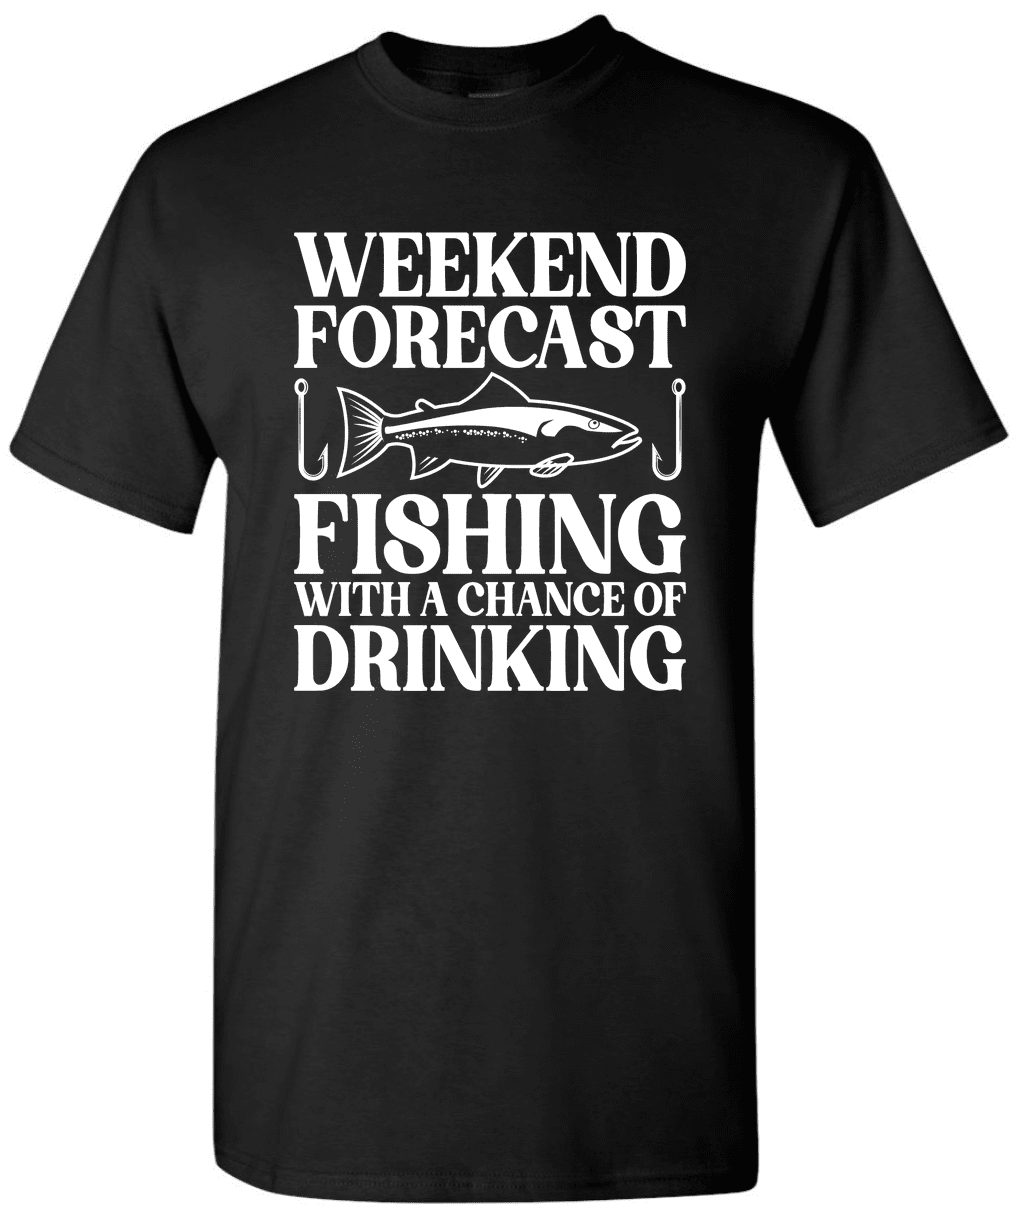 Weekend Forecast Fishing With A Chance Of Drinking - Fishing T